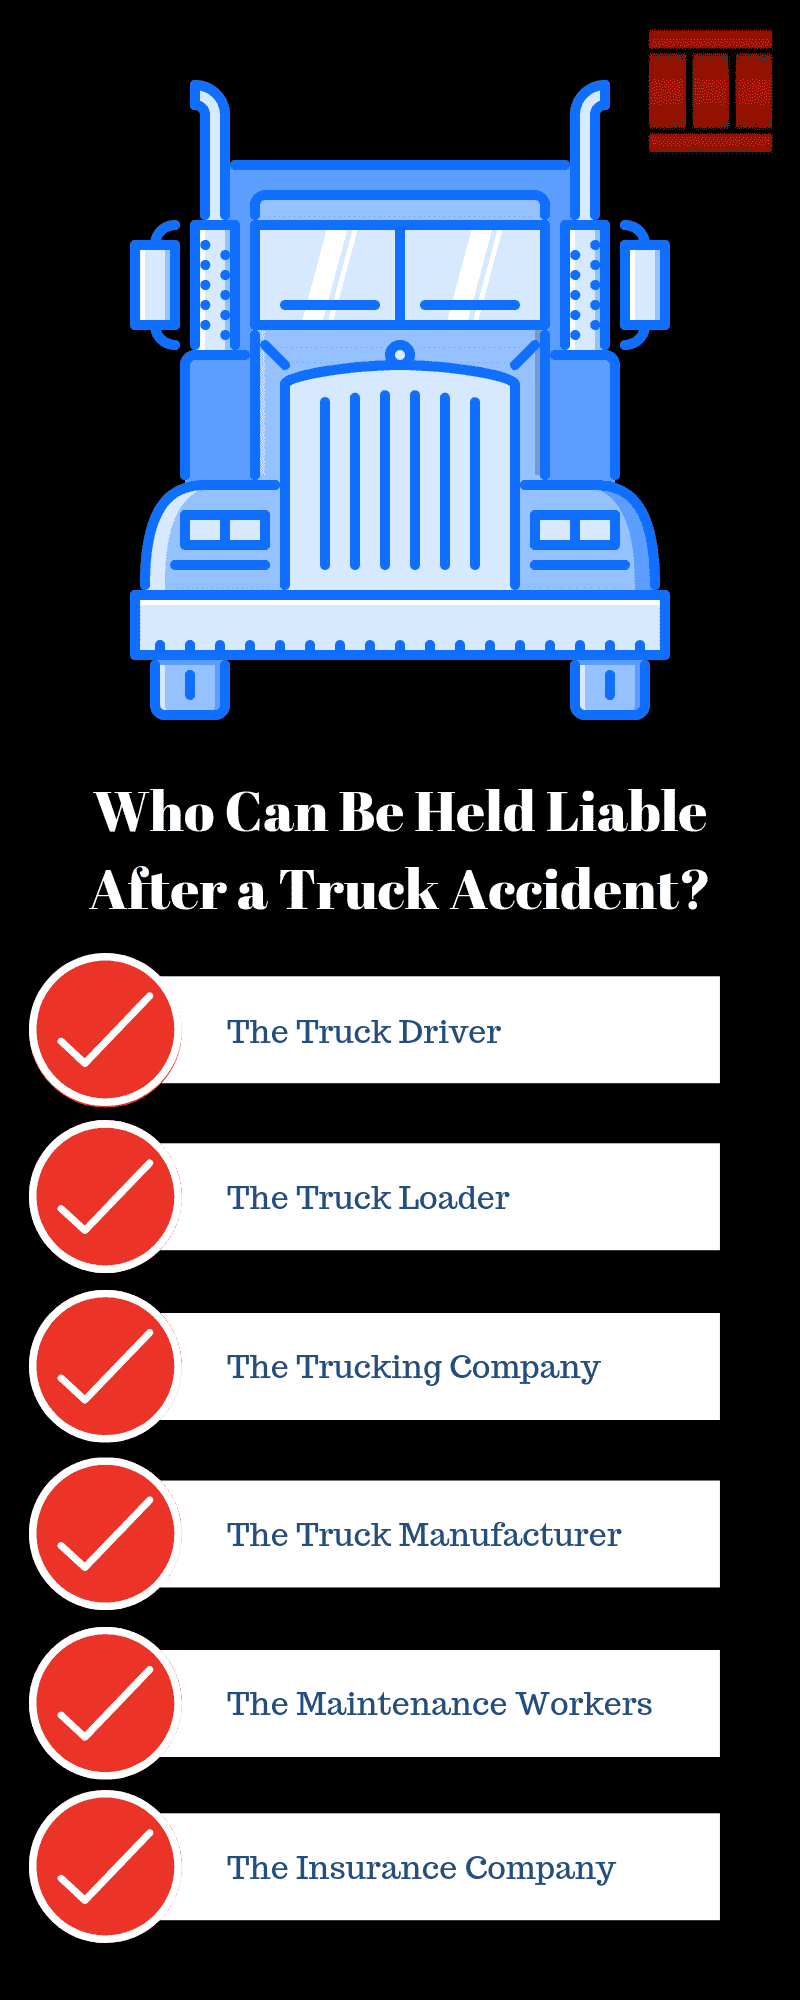 Infographic: Who Can Be Held Liable After a Truck Accident? The truck driver, the truck loader, the trucking company, the truck manufacturer, the maintenance workers, the insurance company